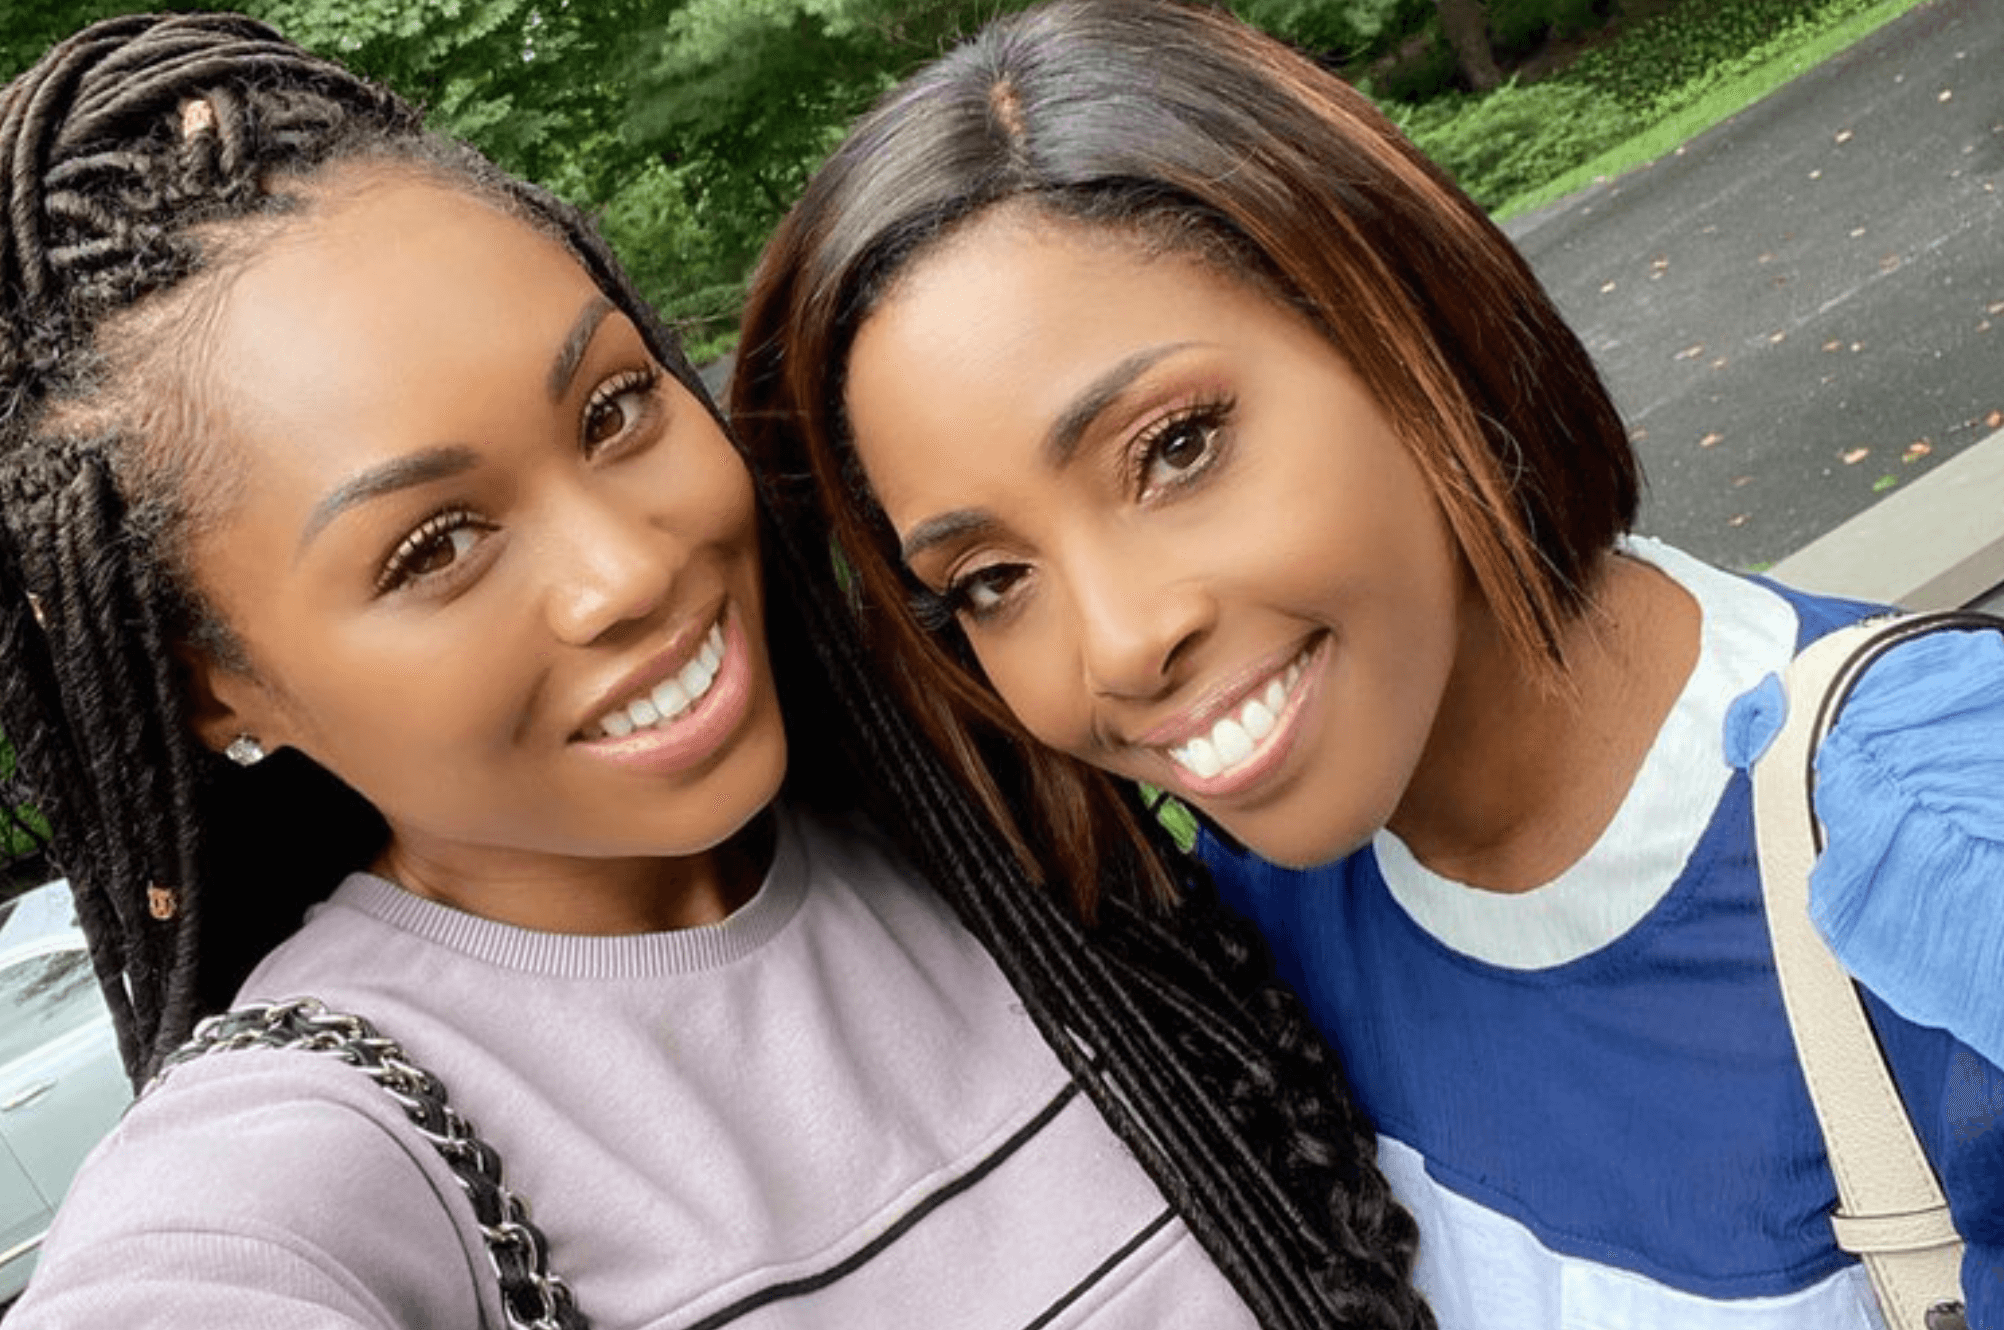 Monique Samuels Opens Up About “True Sisterhood” with Simone Whitmore!